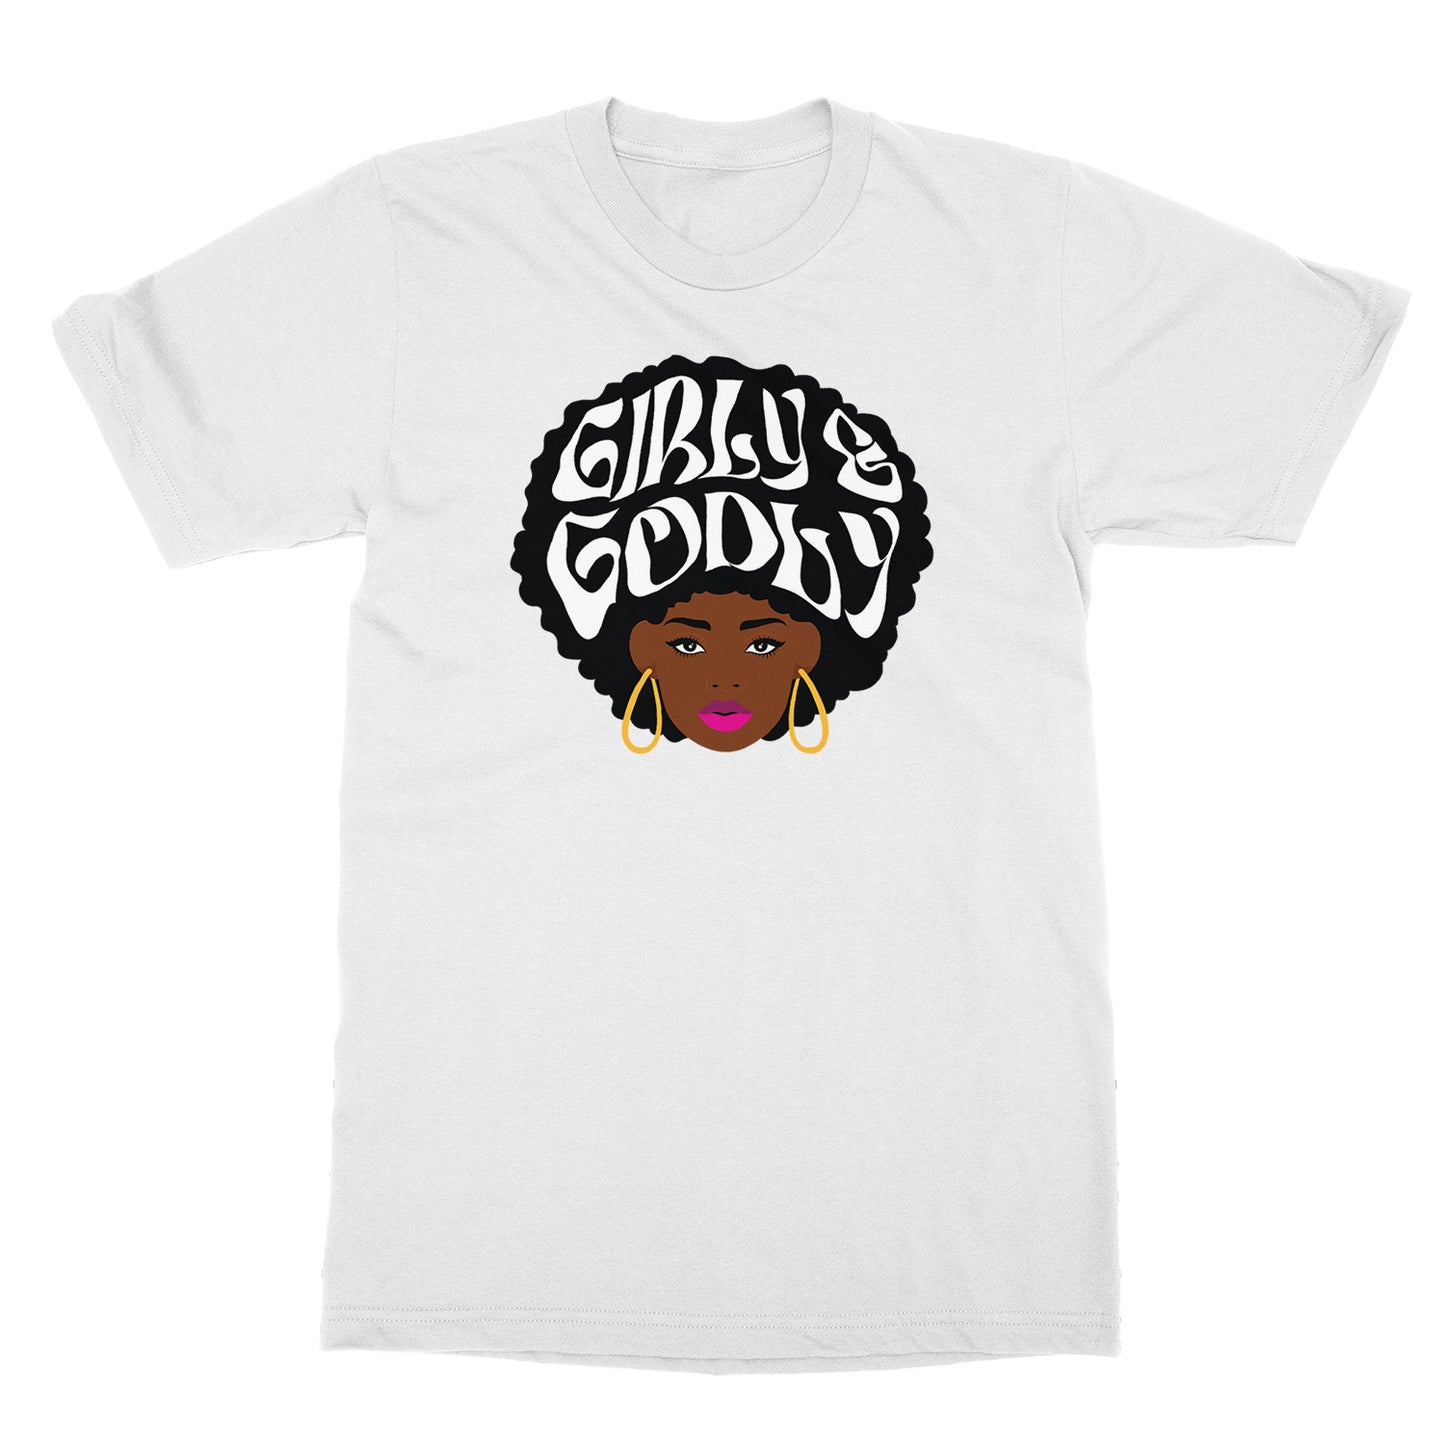 Girly & Godly Afro Hair T-Shirt